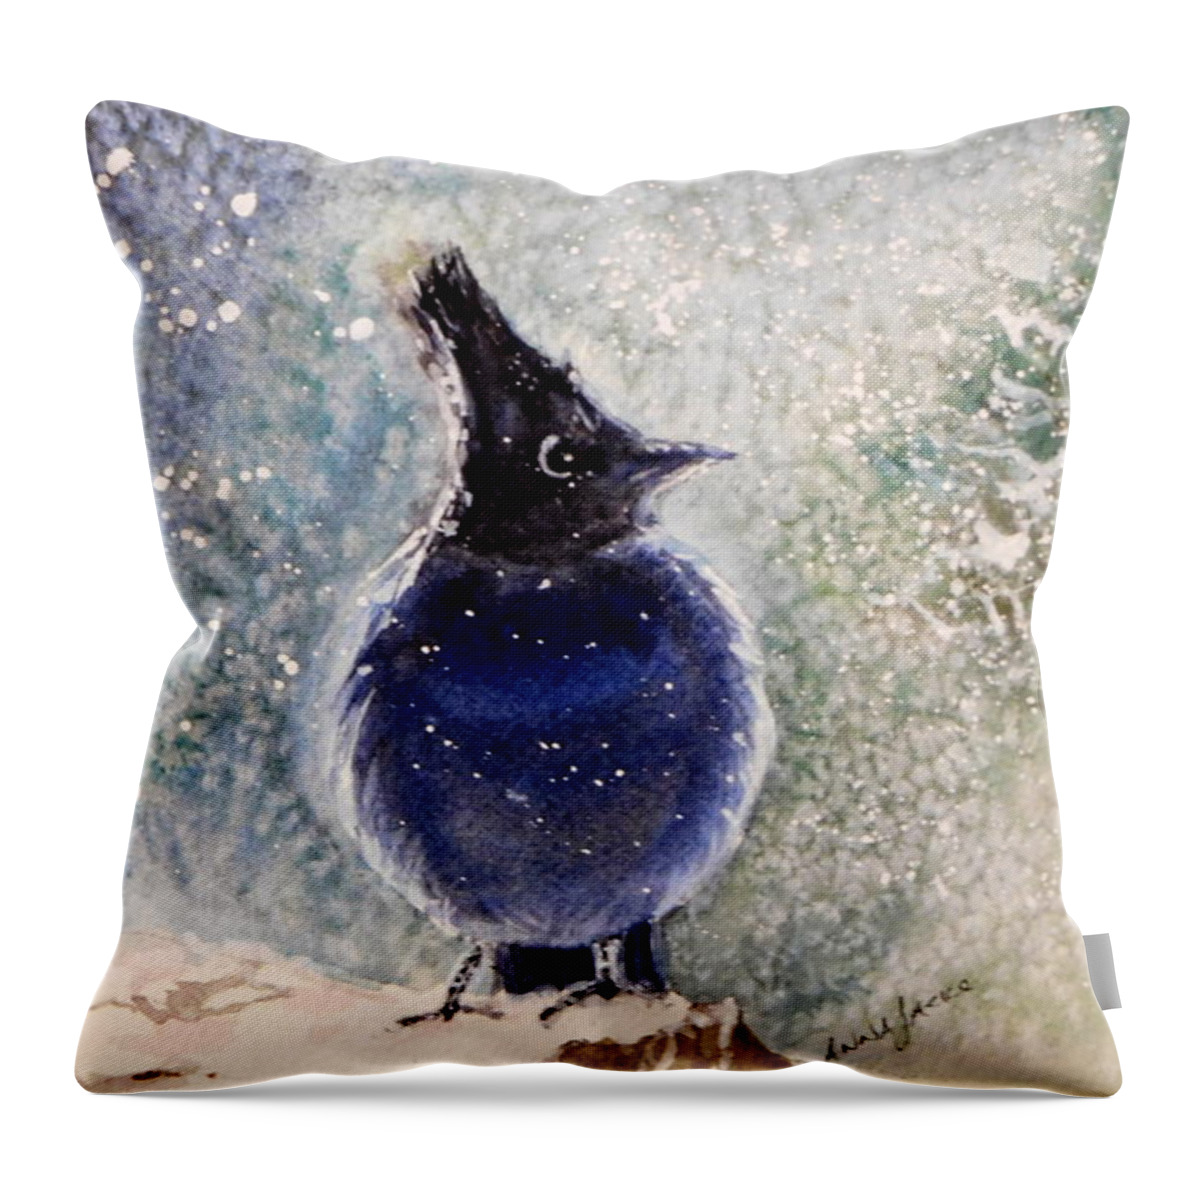 Winter Birds Throw Pillow featuring the painting Steller's Jay by Anna Jacke